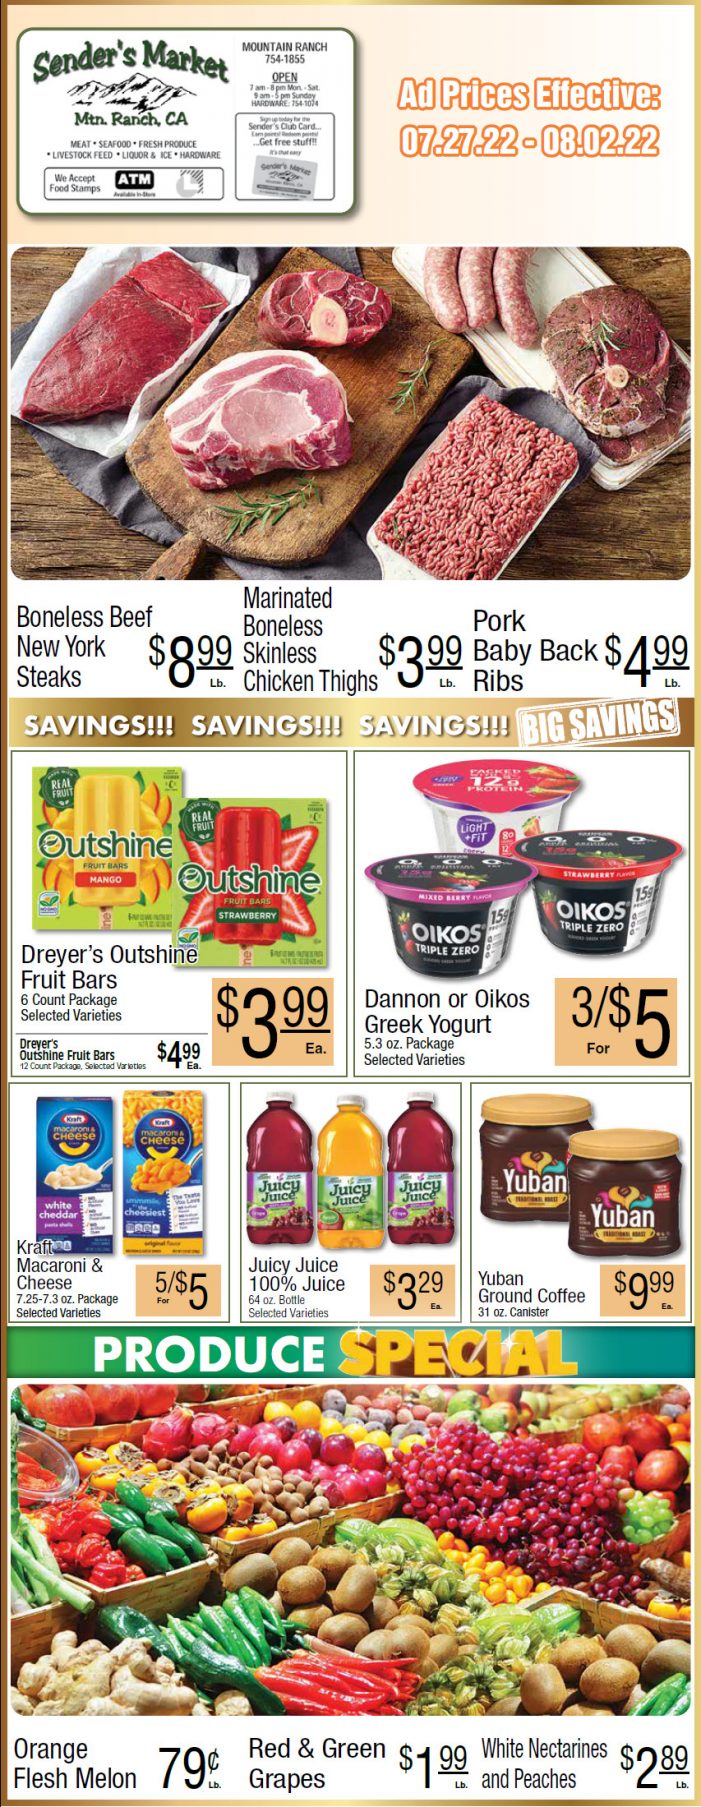 Sender’s Market Weekly Ad & Grocery Specials Through August 2nd! Shop Local & Save!